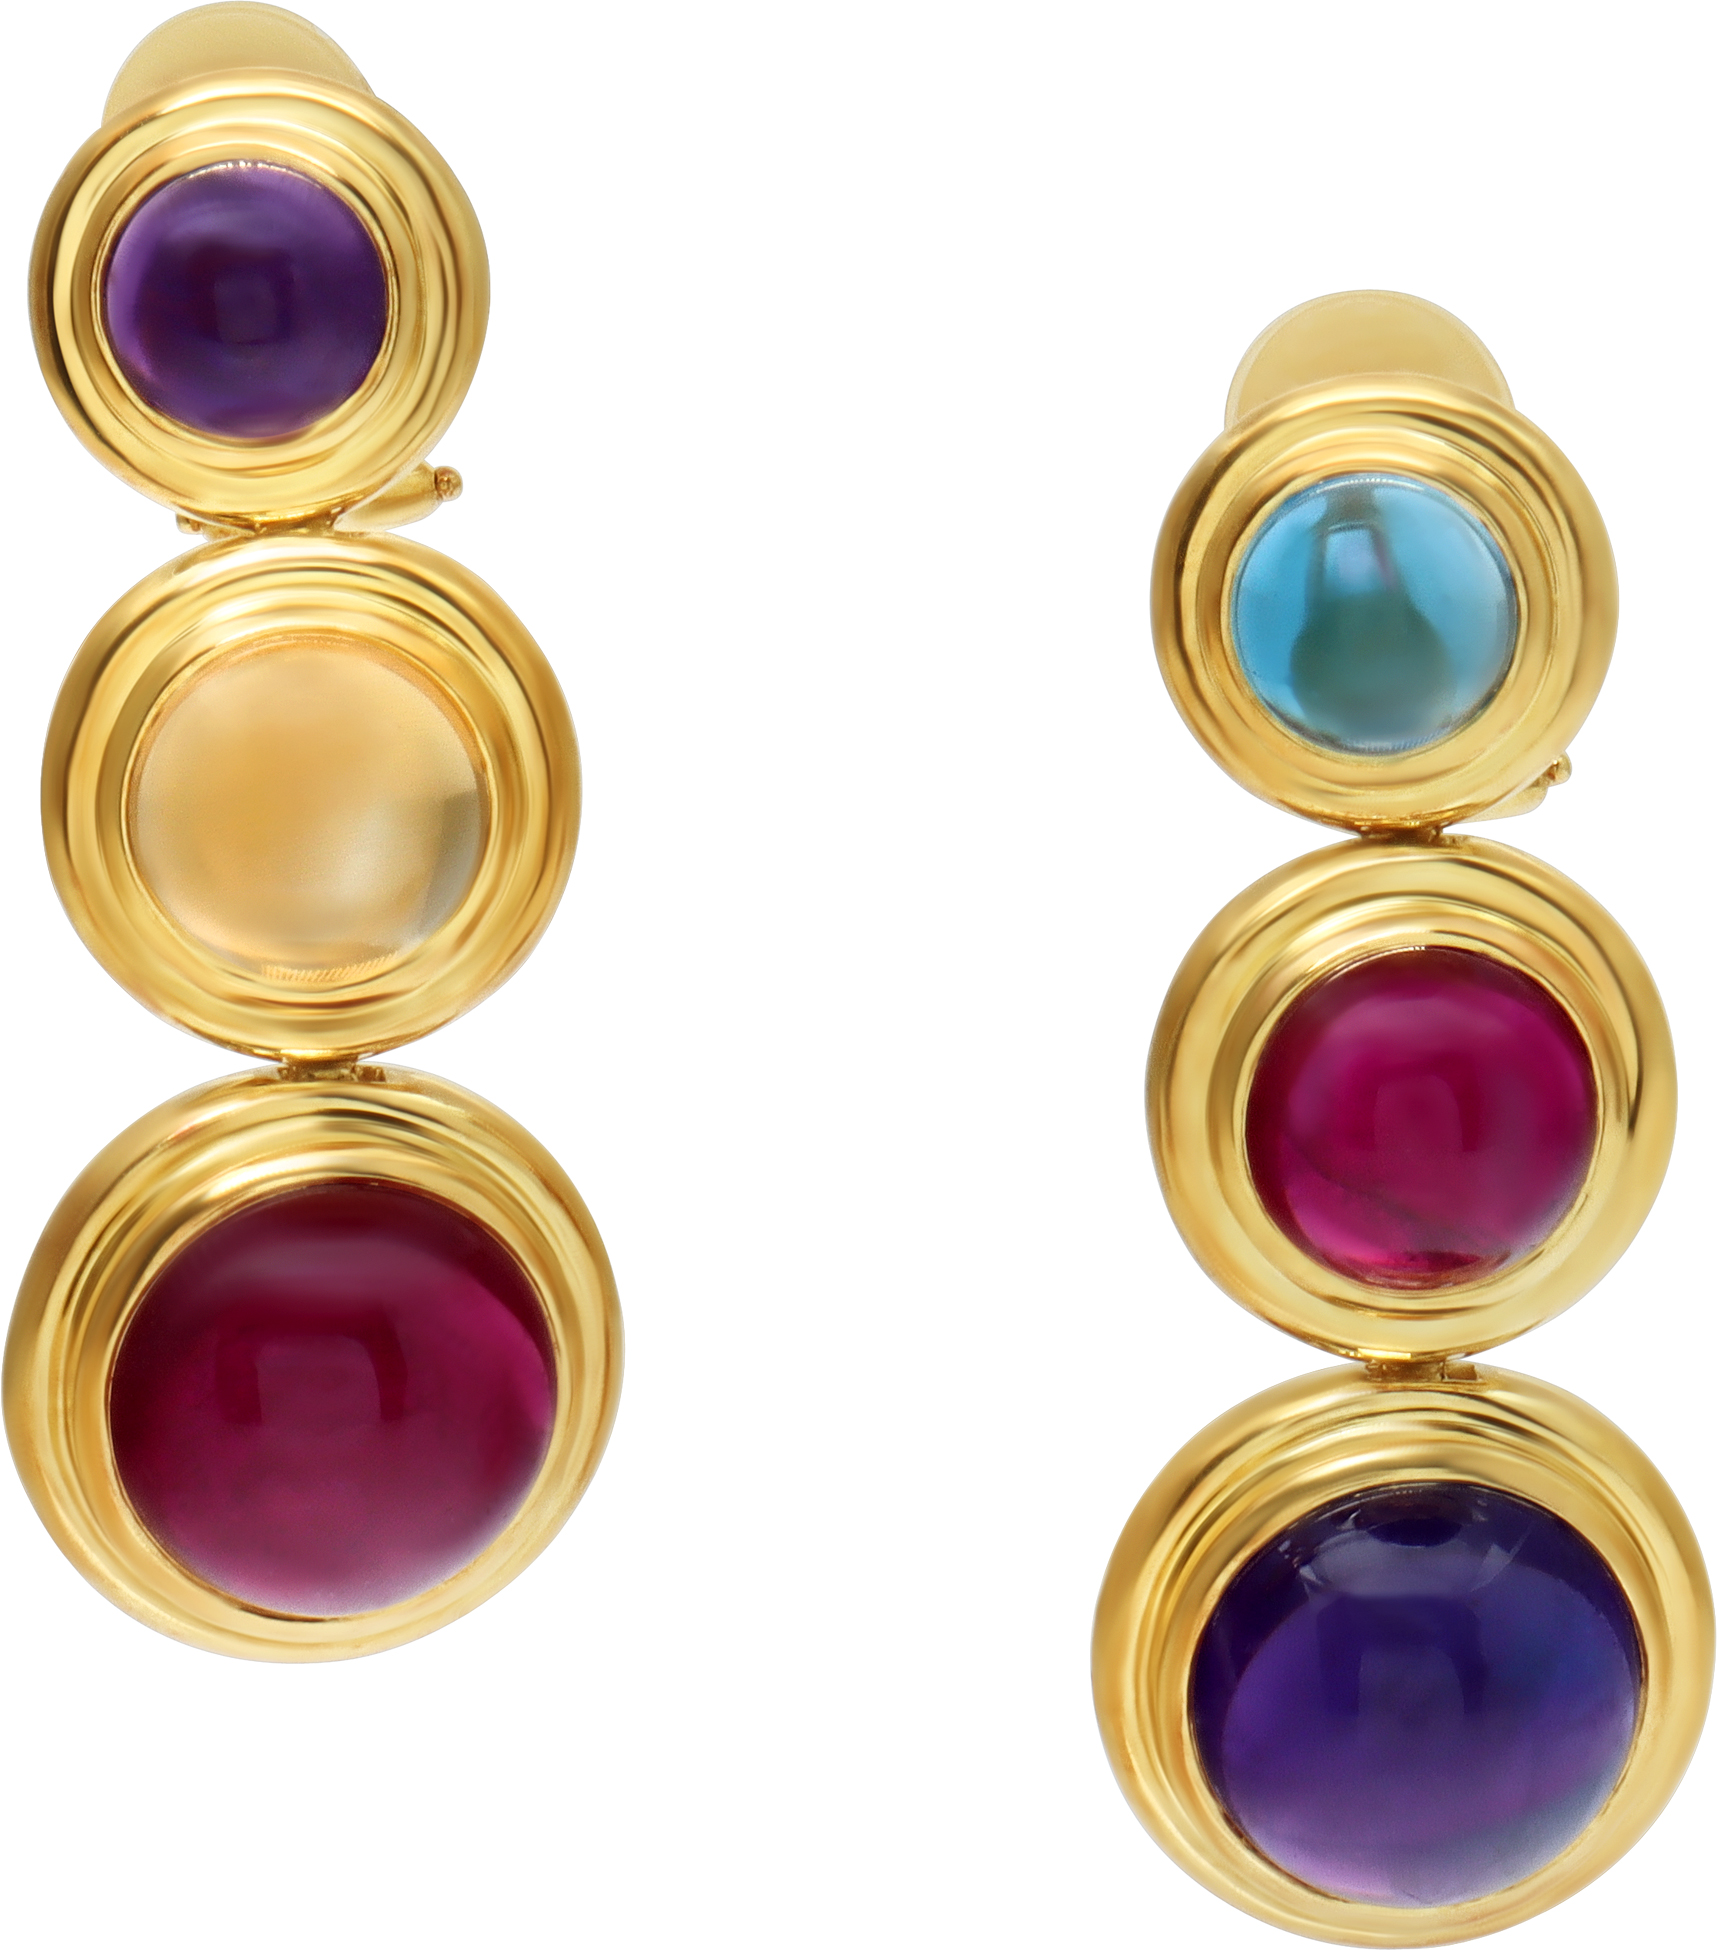 Tiffany & Co. Paloma Picasso Earrings In 18k Yellow Gold